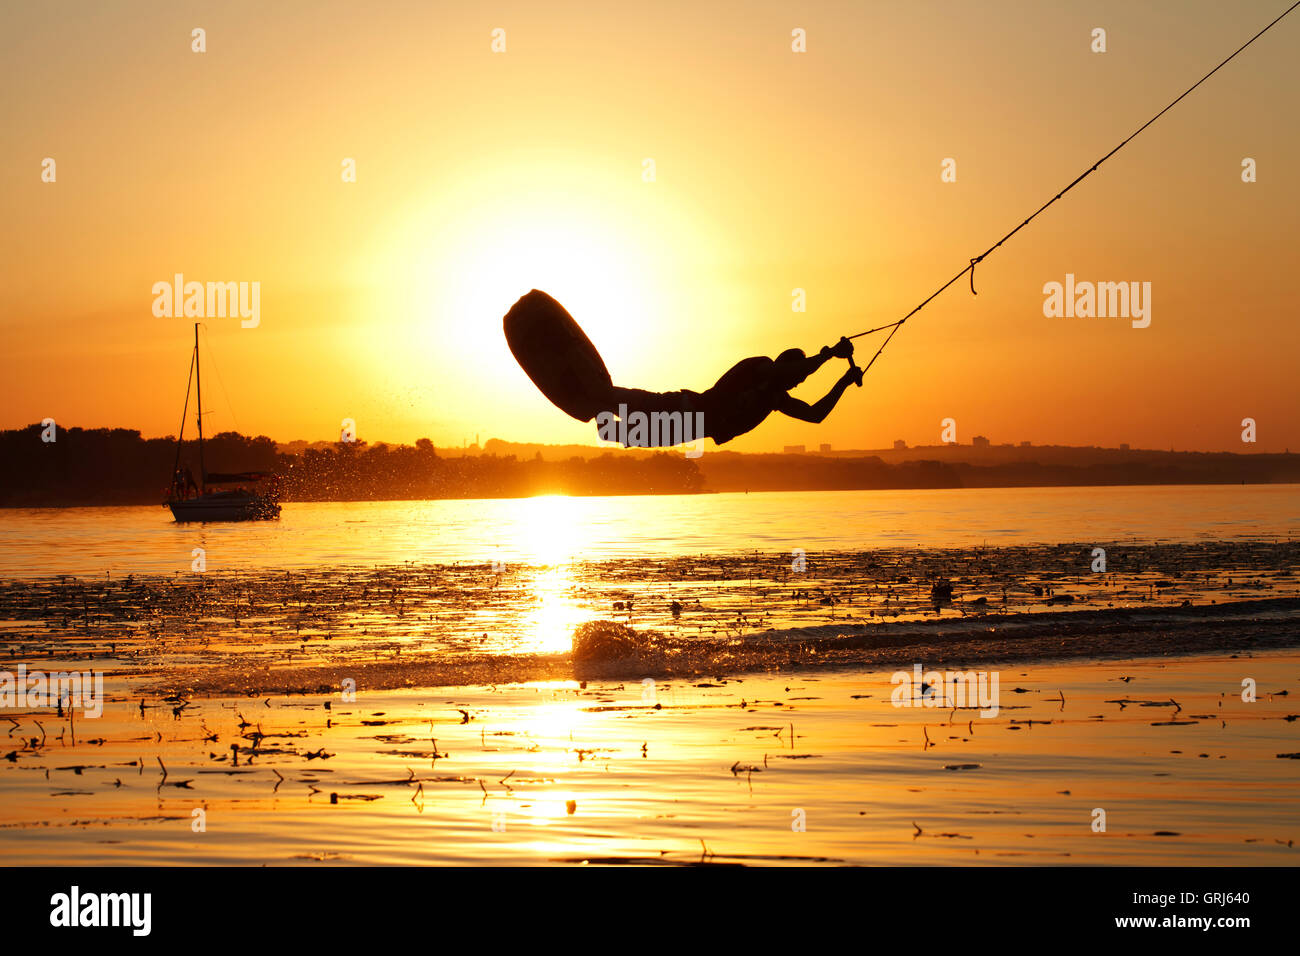 a wakeboard, athlete silhouette on sunset background Stock Photo